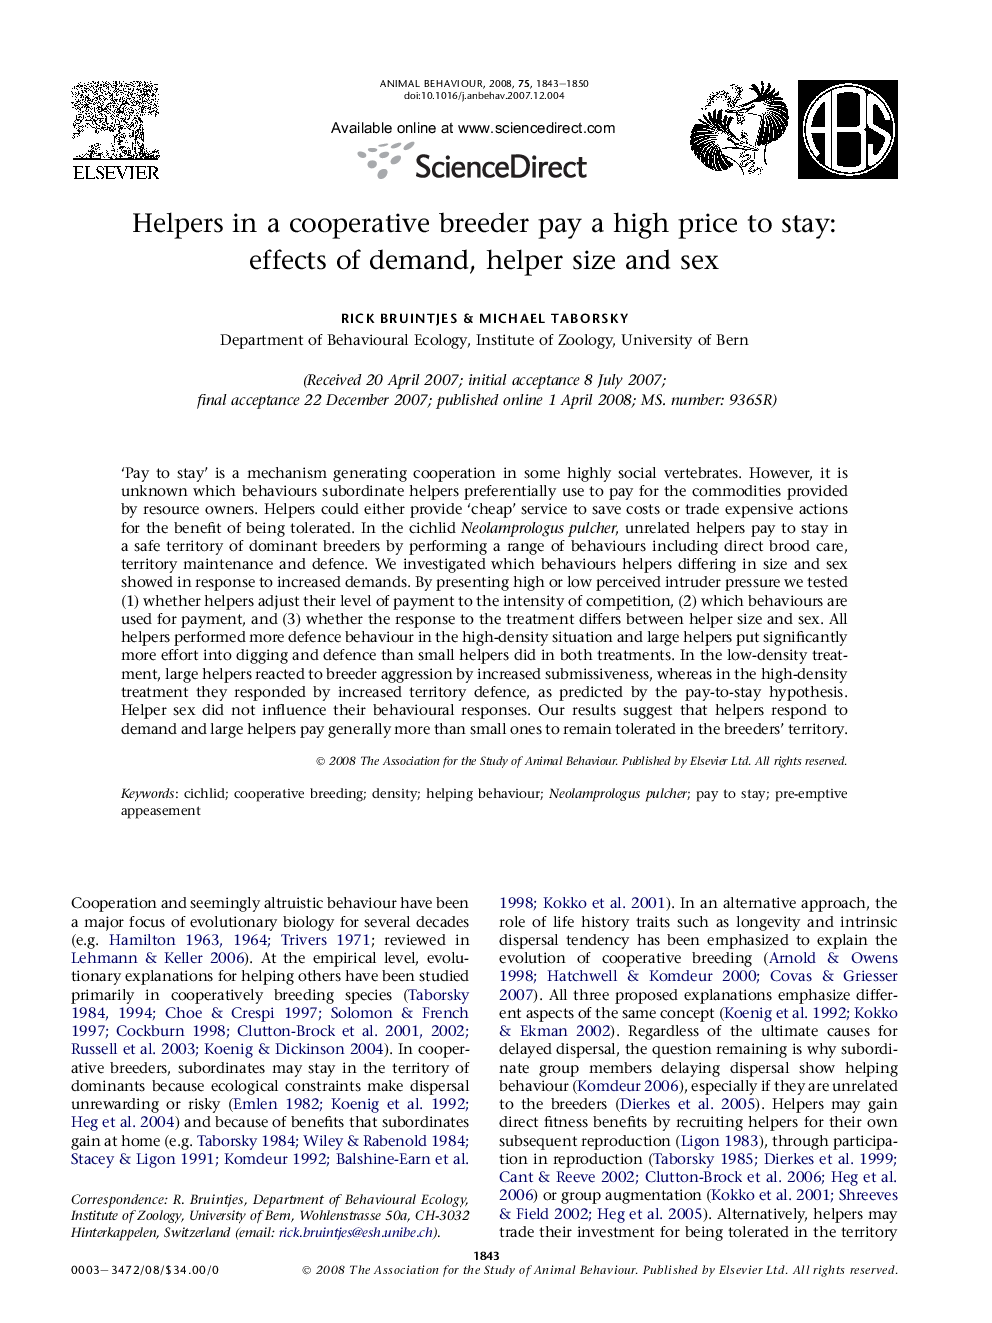 Helpers in a cooperative breeder pay a high price to stay: effects of demand, helper size and sex